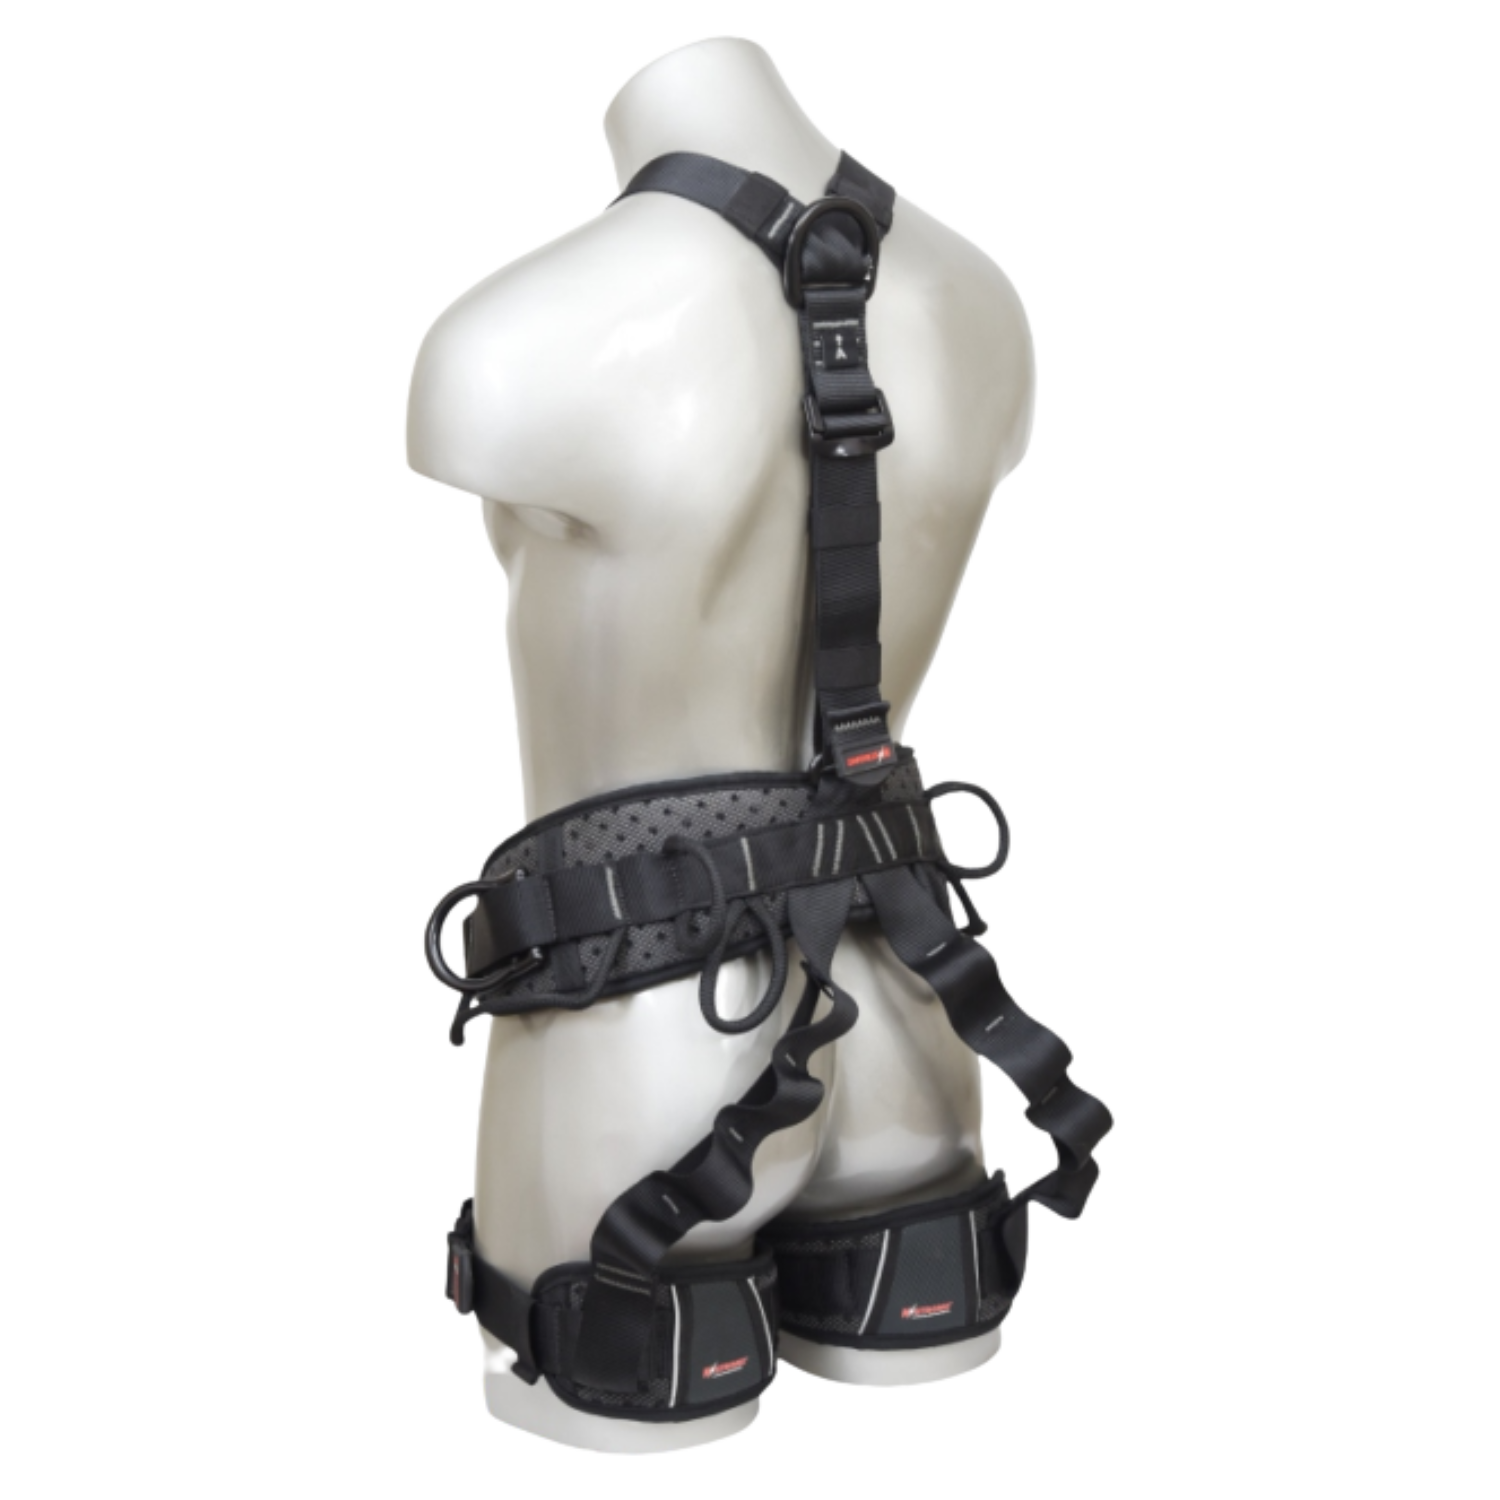 Climbing Technology Torse Chest Harness - Chest harness, Buy online